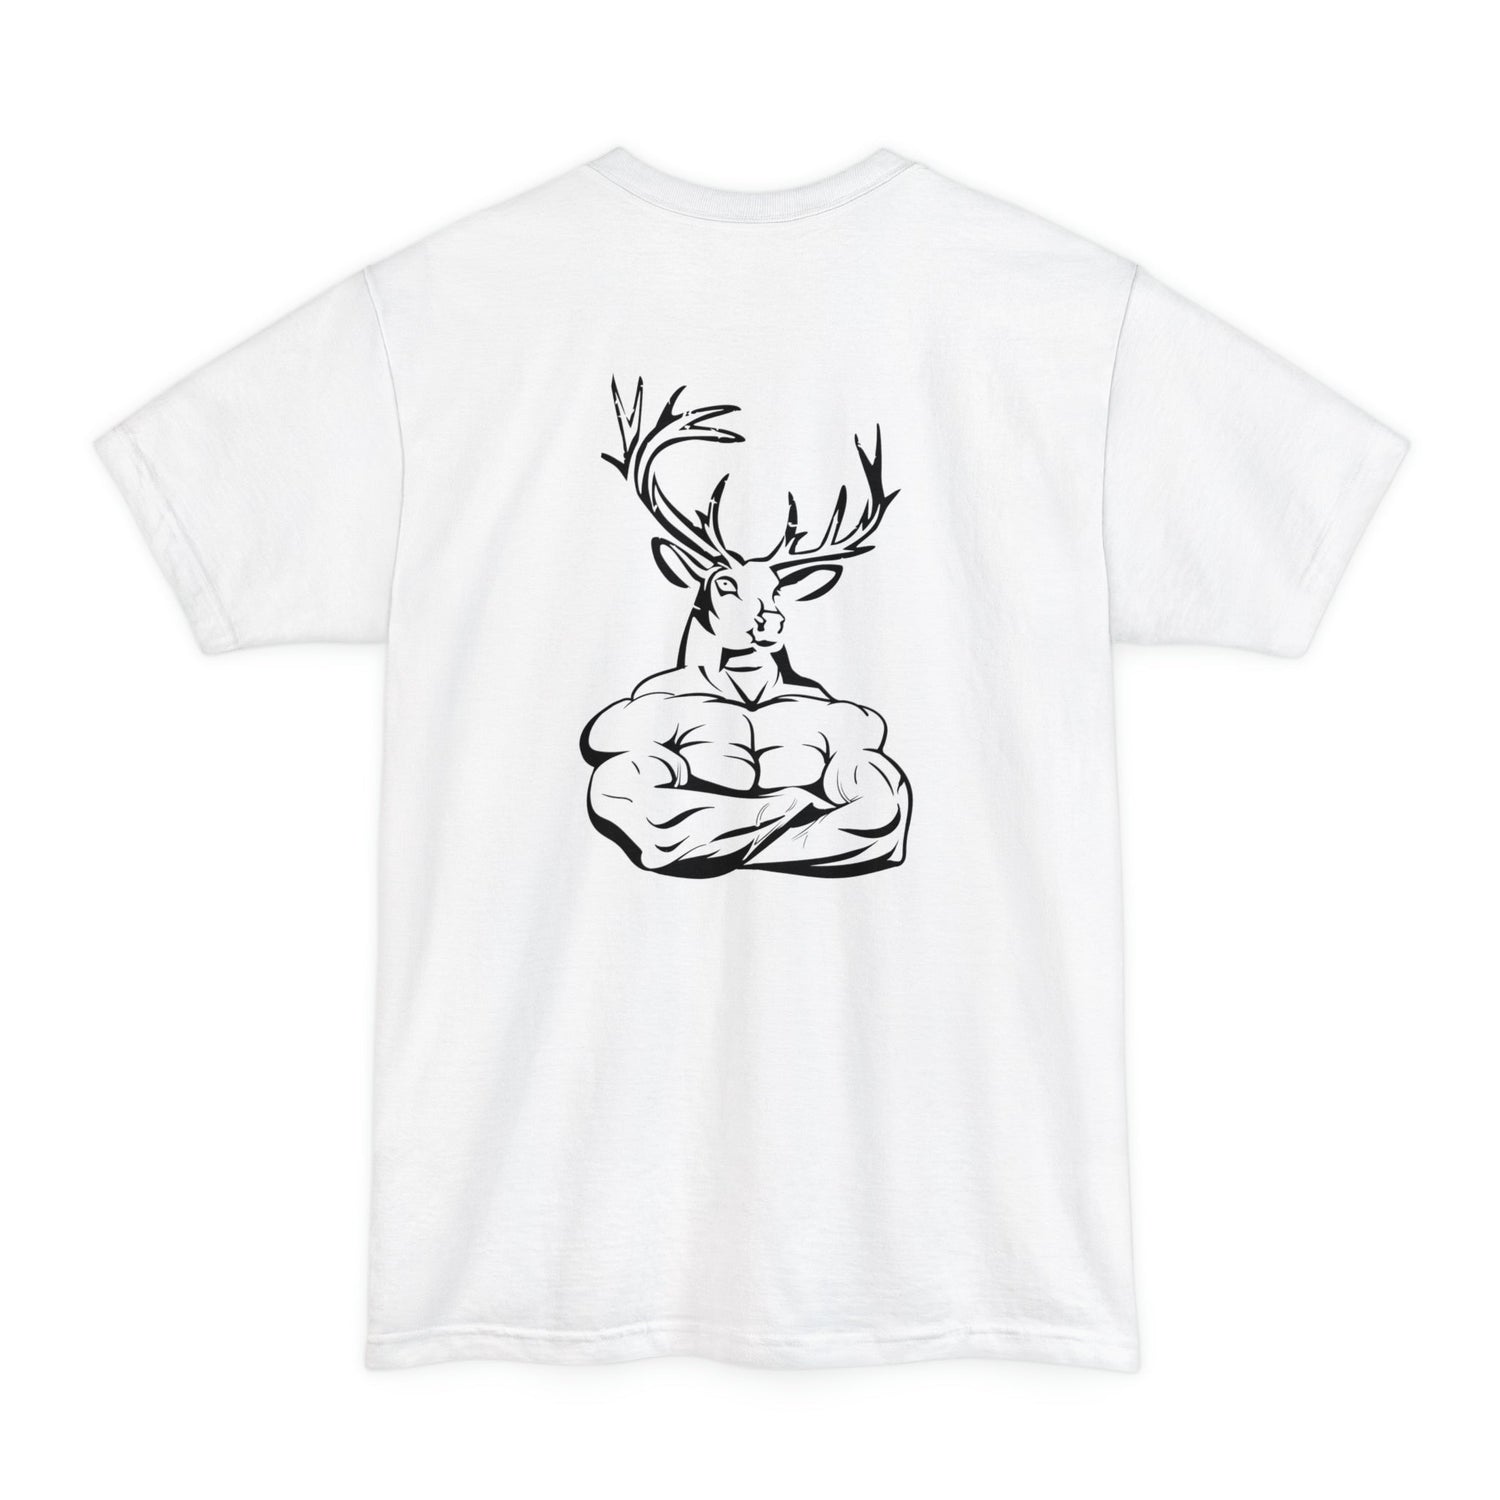 Big and tall deer hunting t-shirt, color white, front design placement